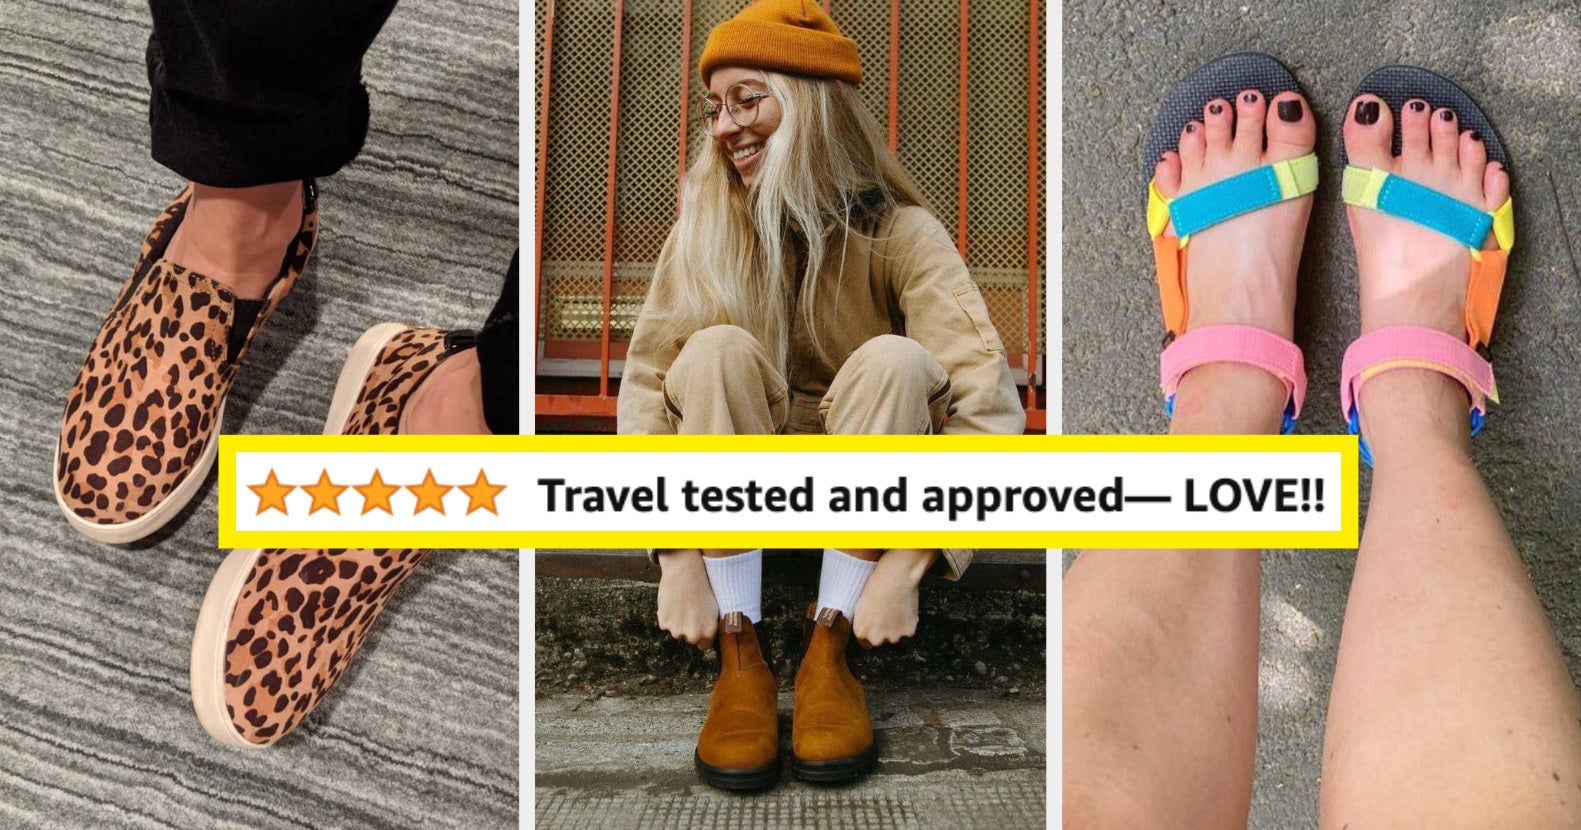 28 Footwear Options Reviewers Swear By For Long Travel Days